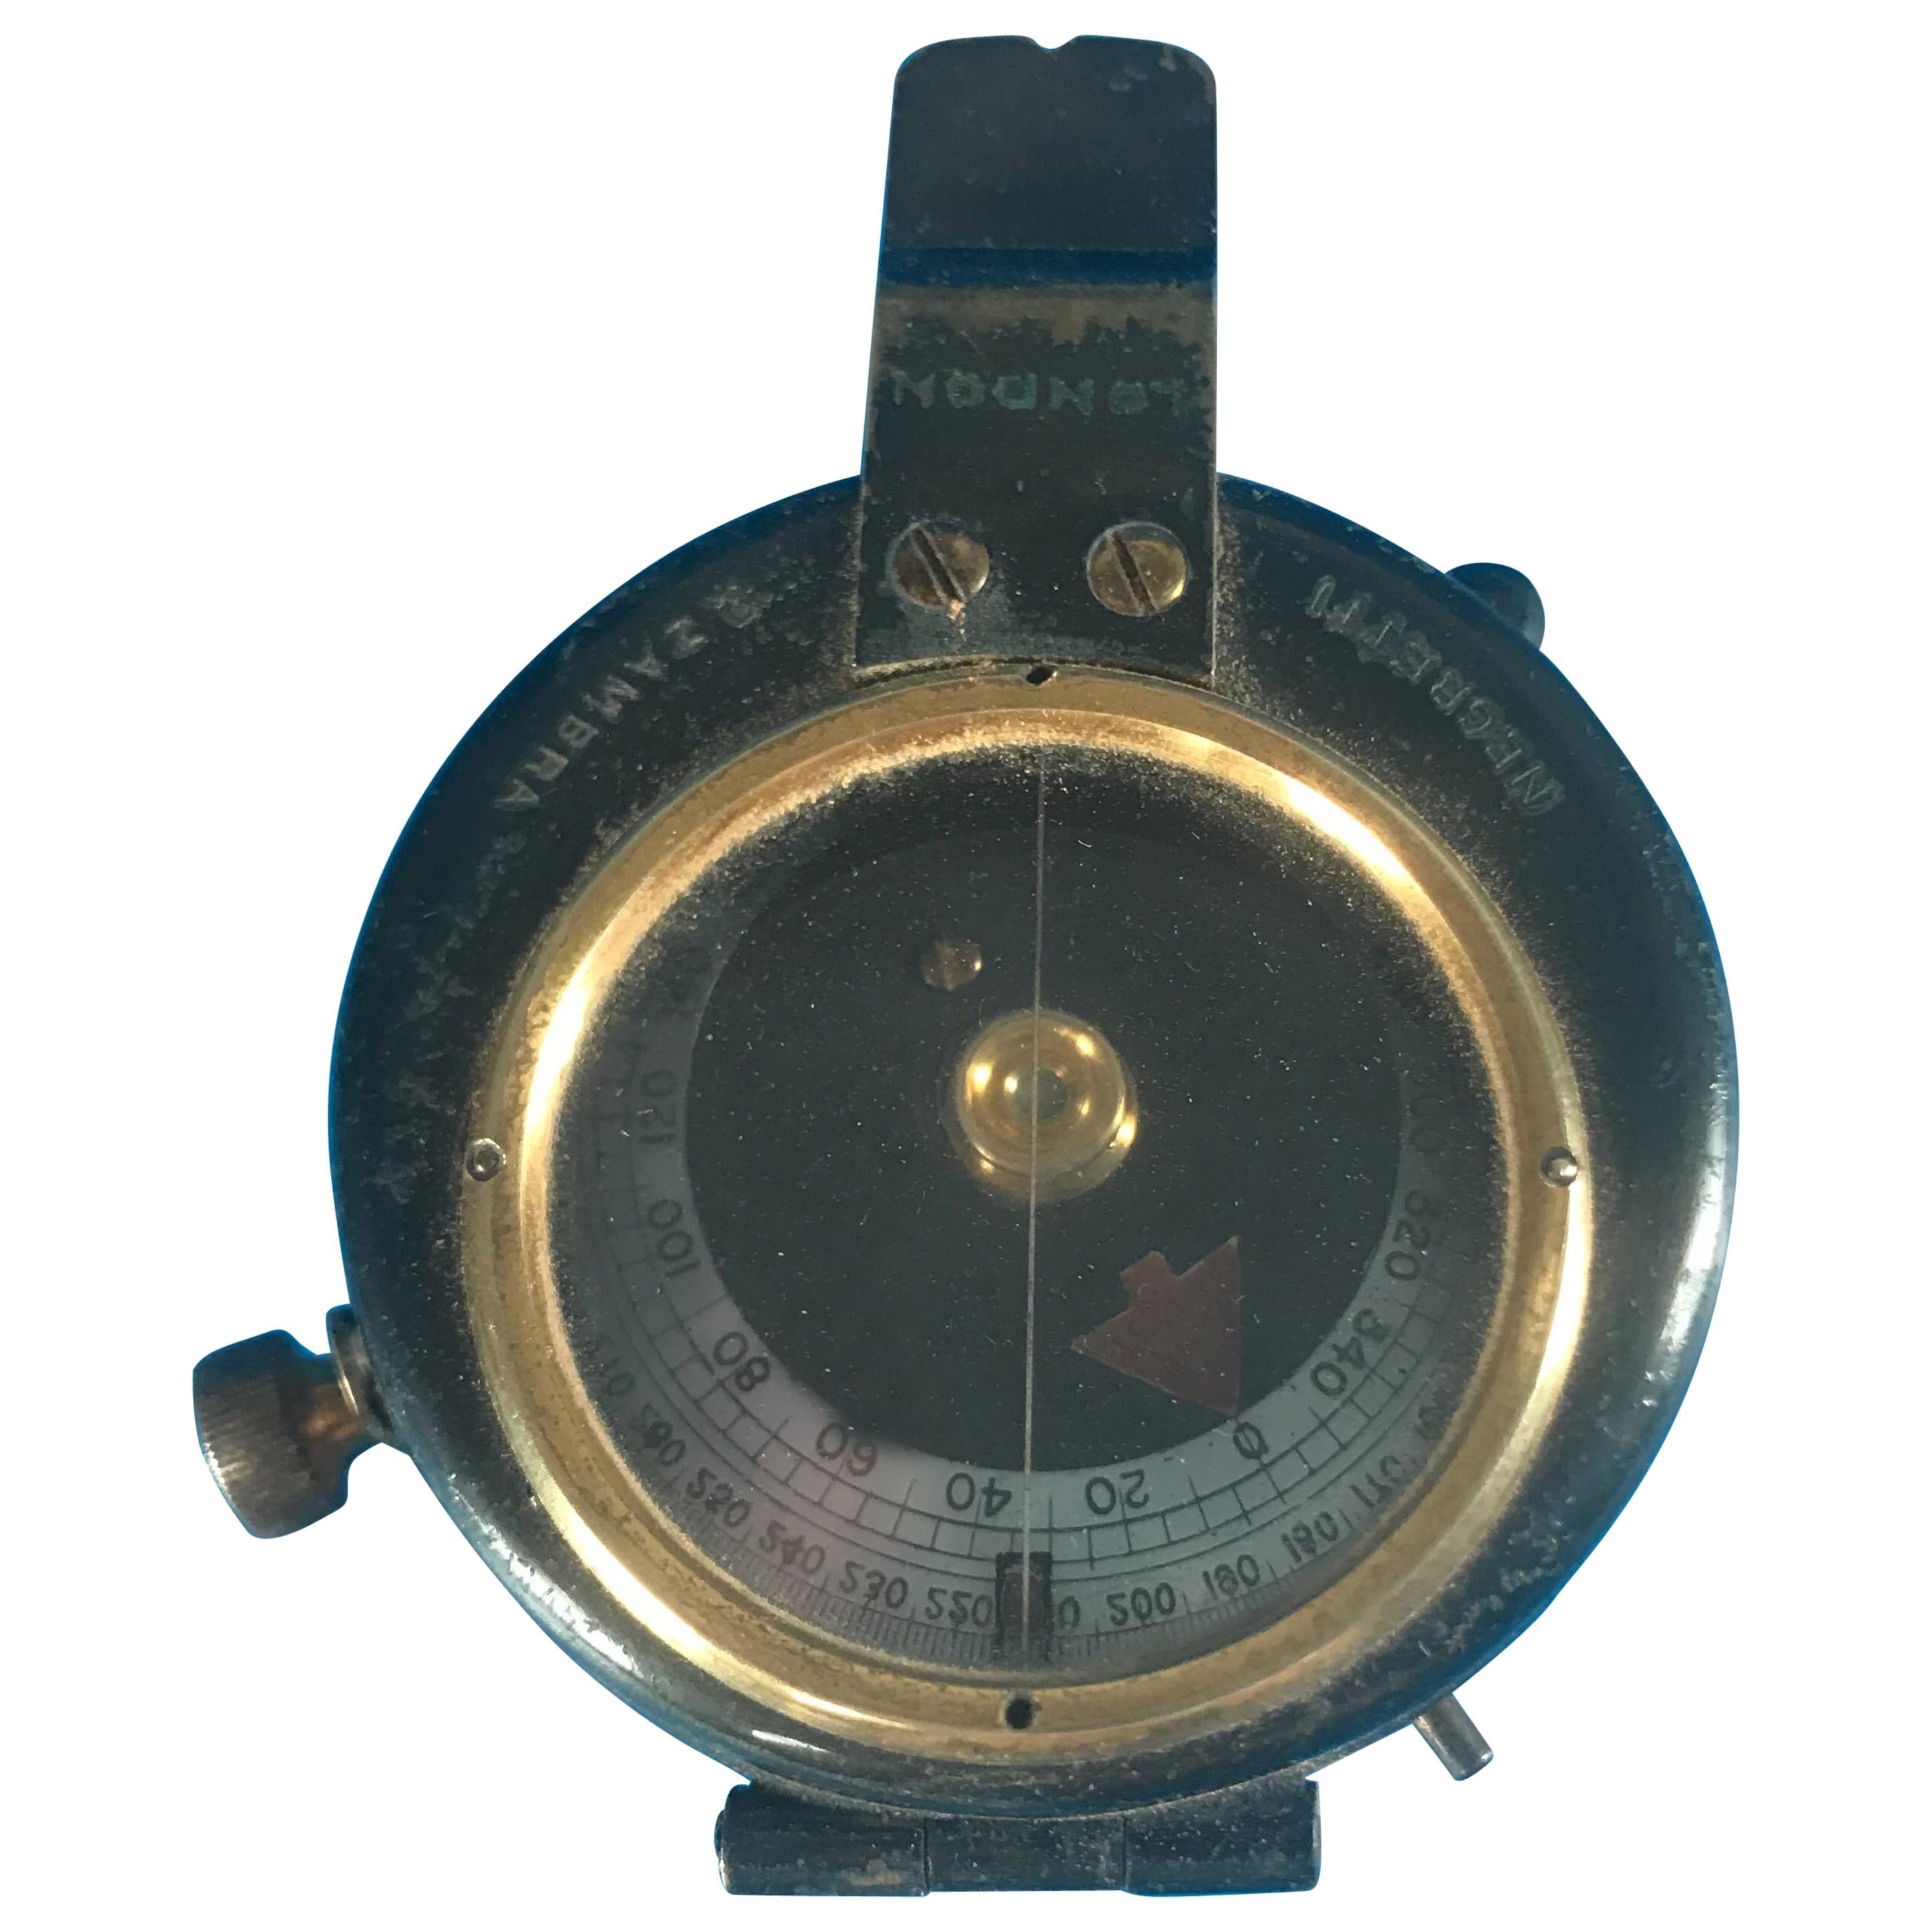 World War One 1918 Military Compass with Its Original Case